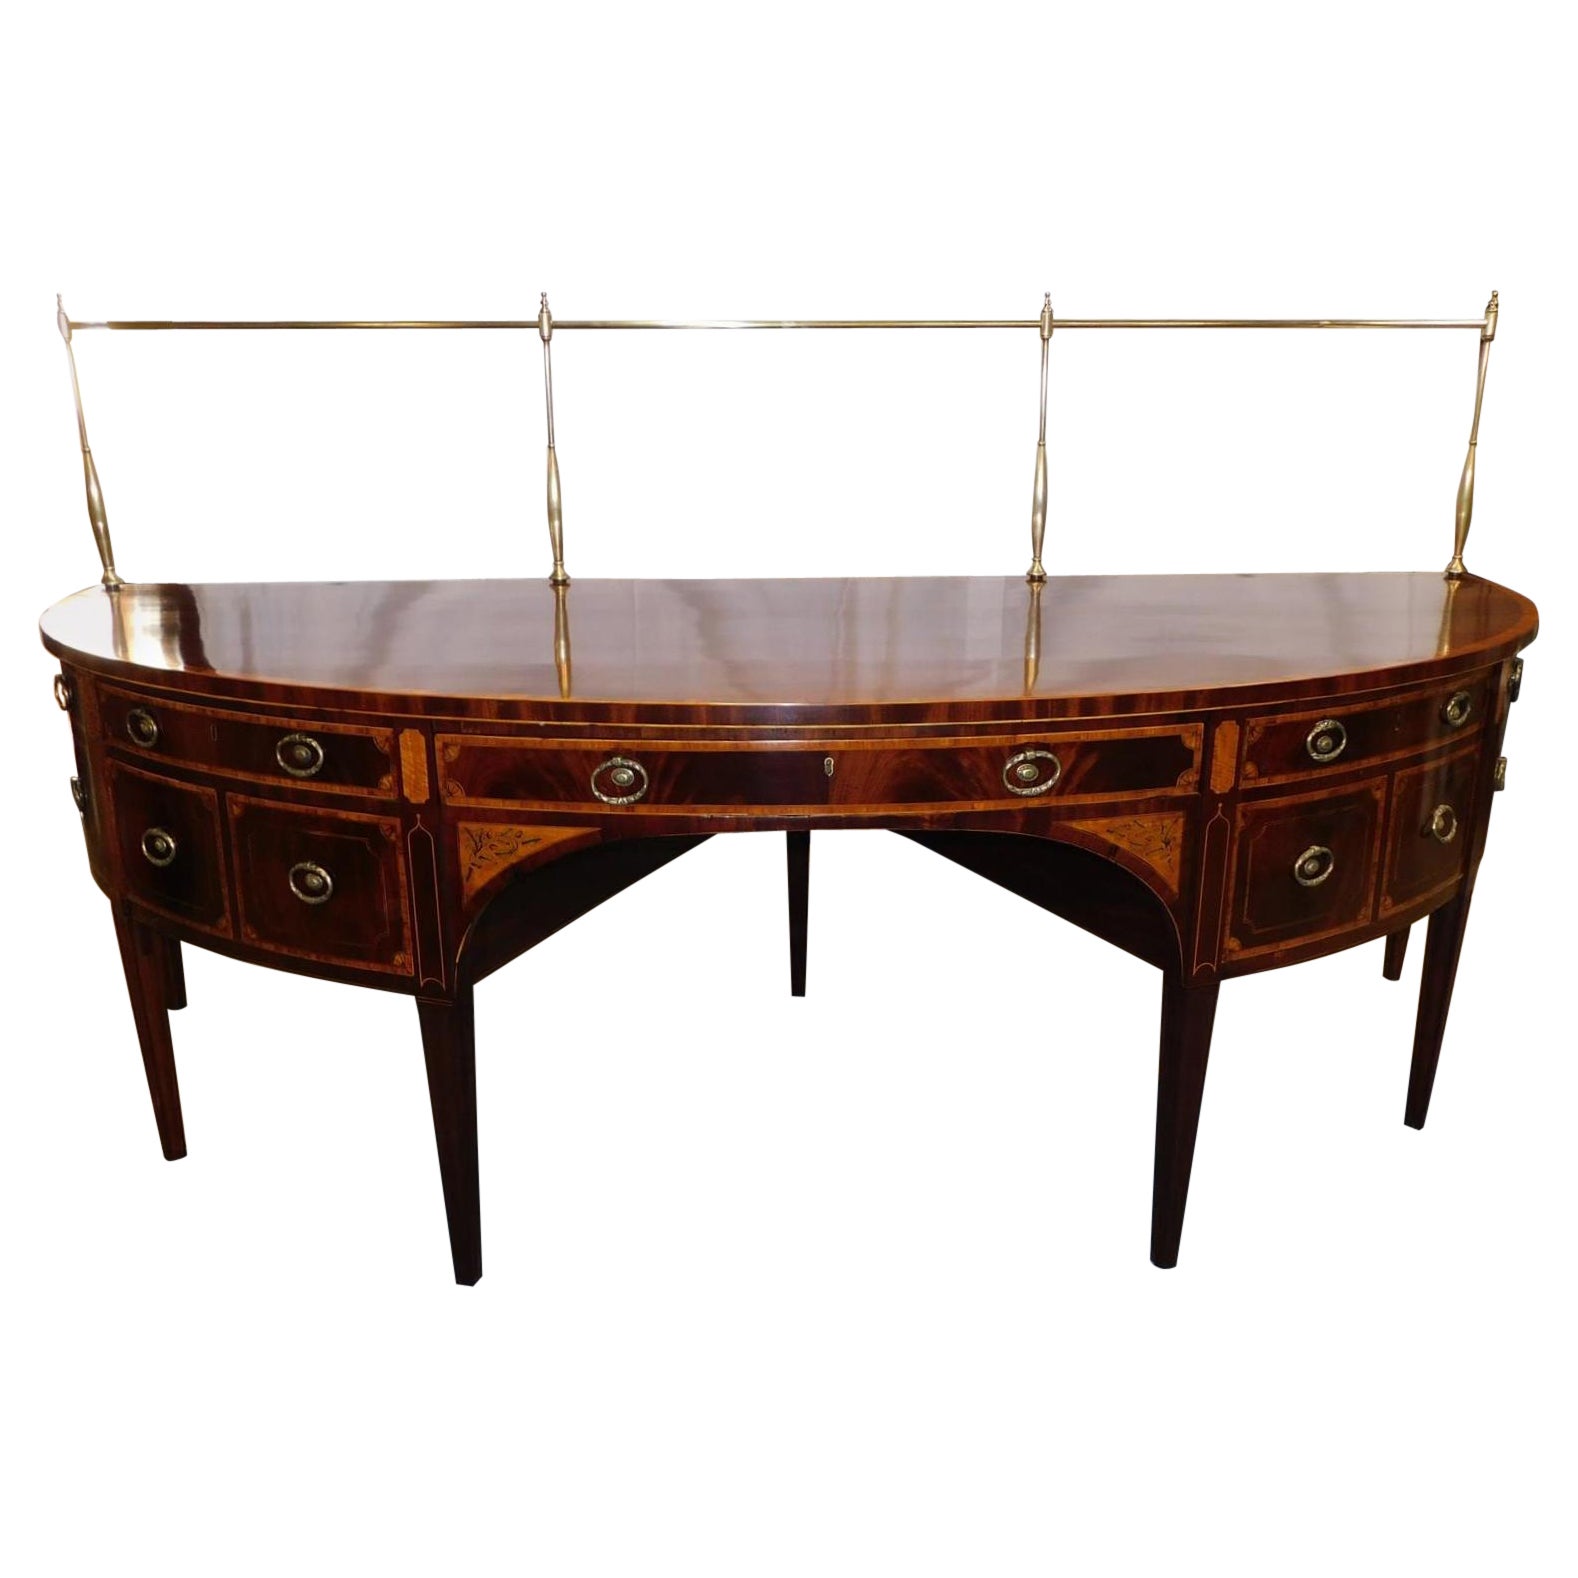 English Hepplewhite Mahogany Patera Inlaid Sideboard with Brass Gallery, C. 1770 For Sale